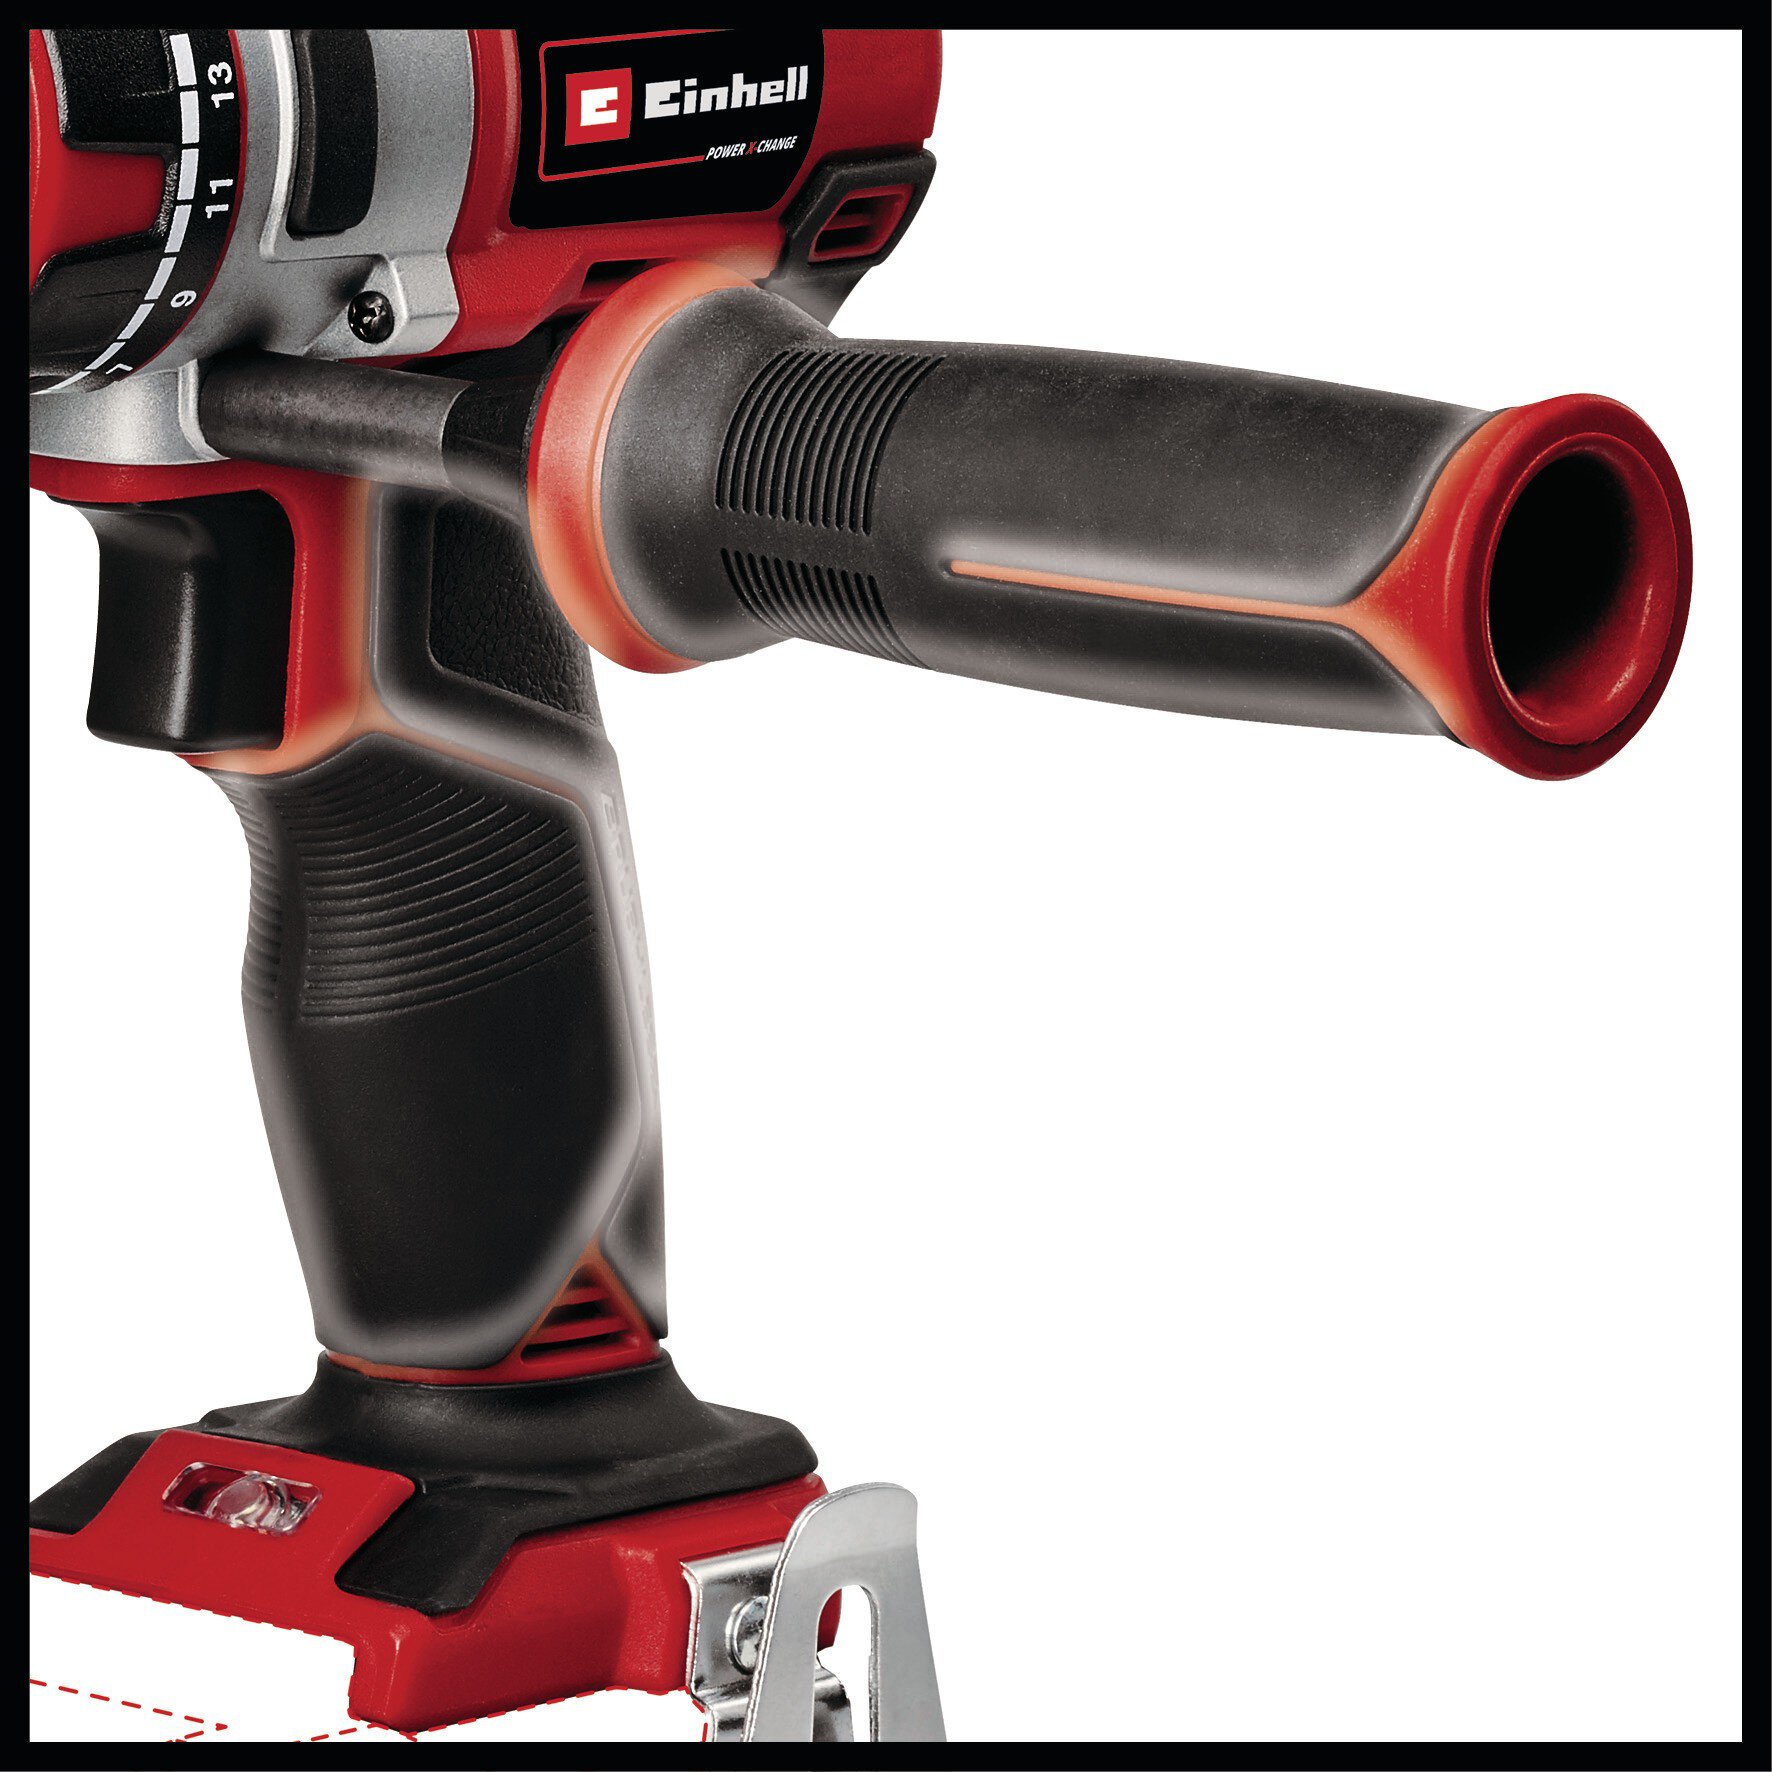 einhell-professional-cordless-drill-4513850-detail_image-003